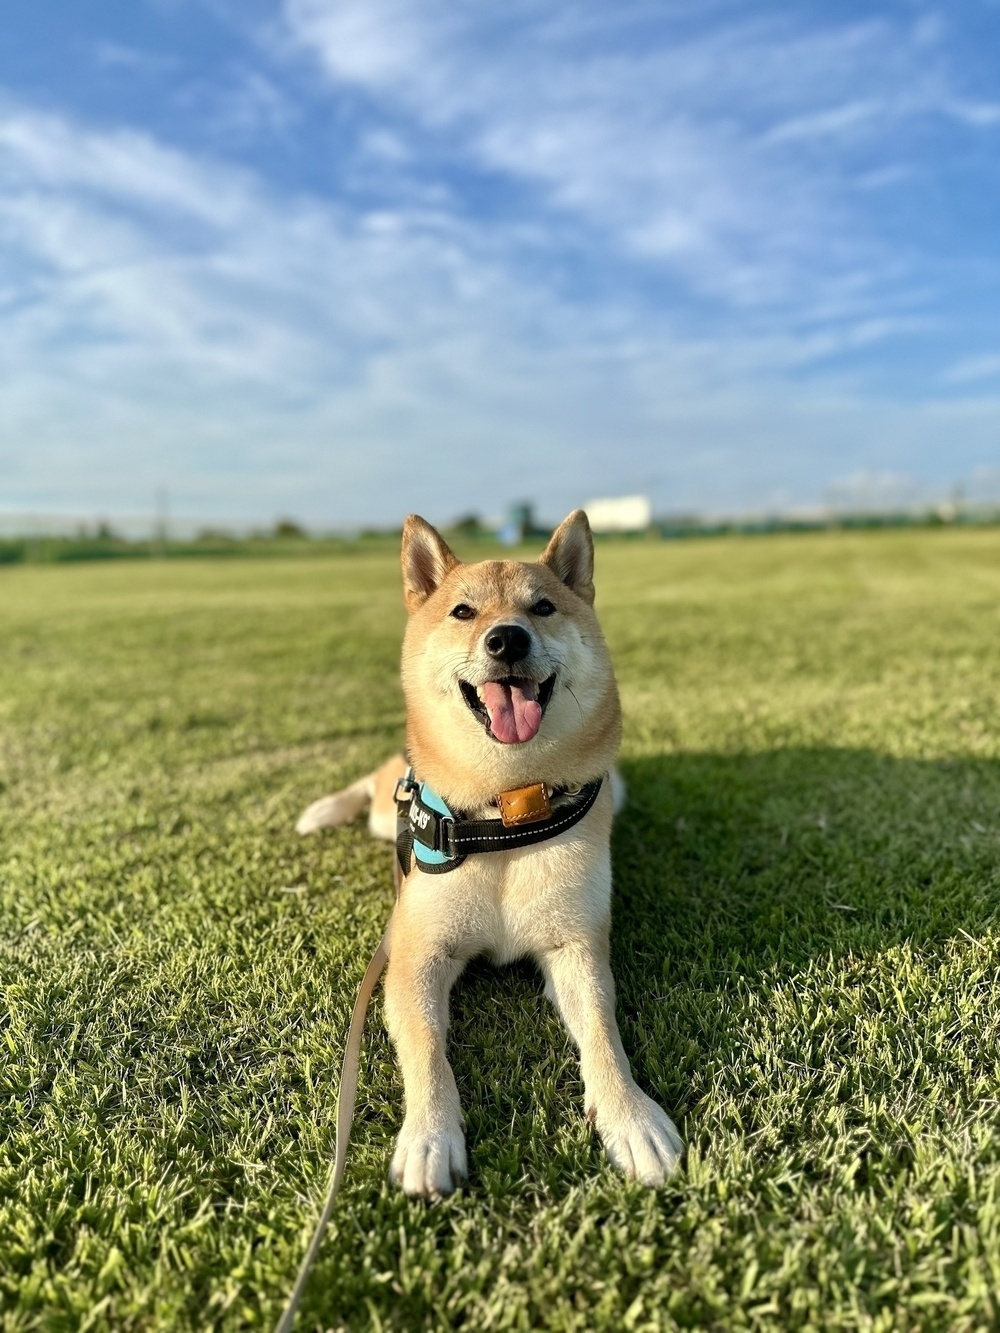 A happy male Shiba dog lies on the grass in a wide open field under a clear blue sky.